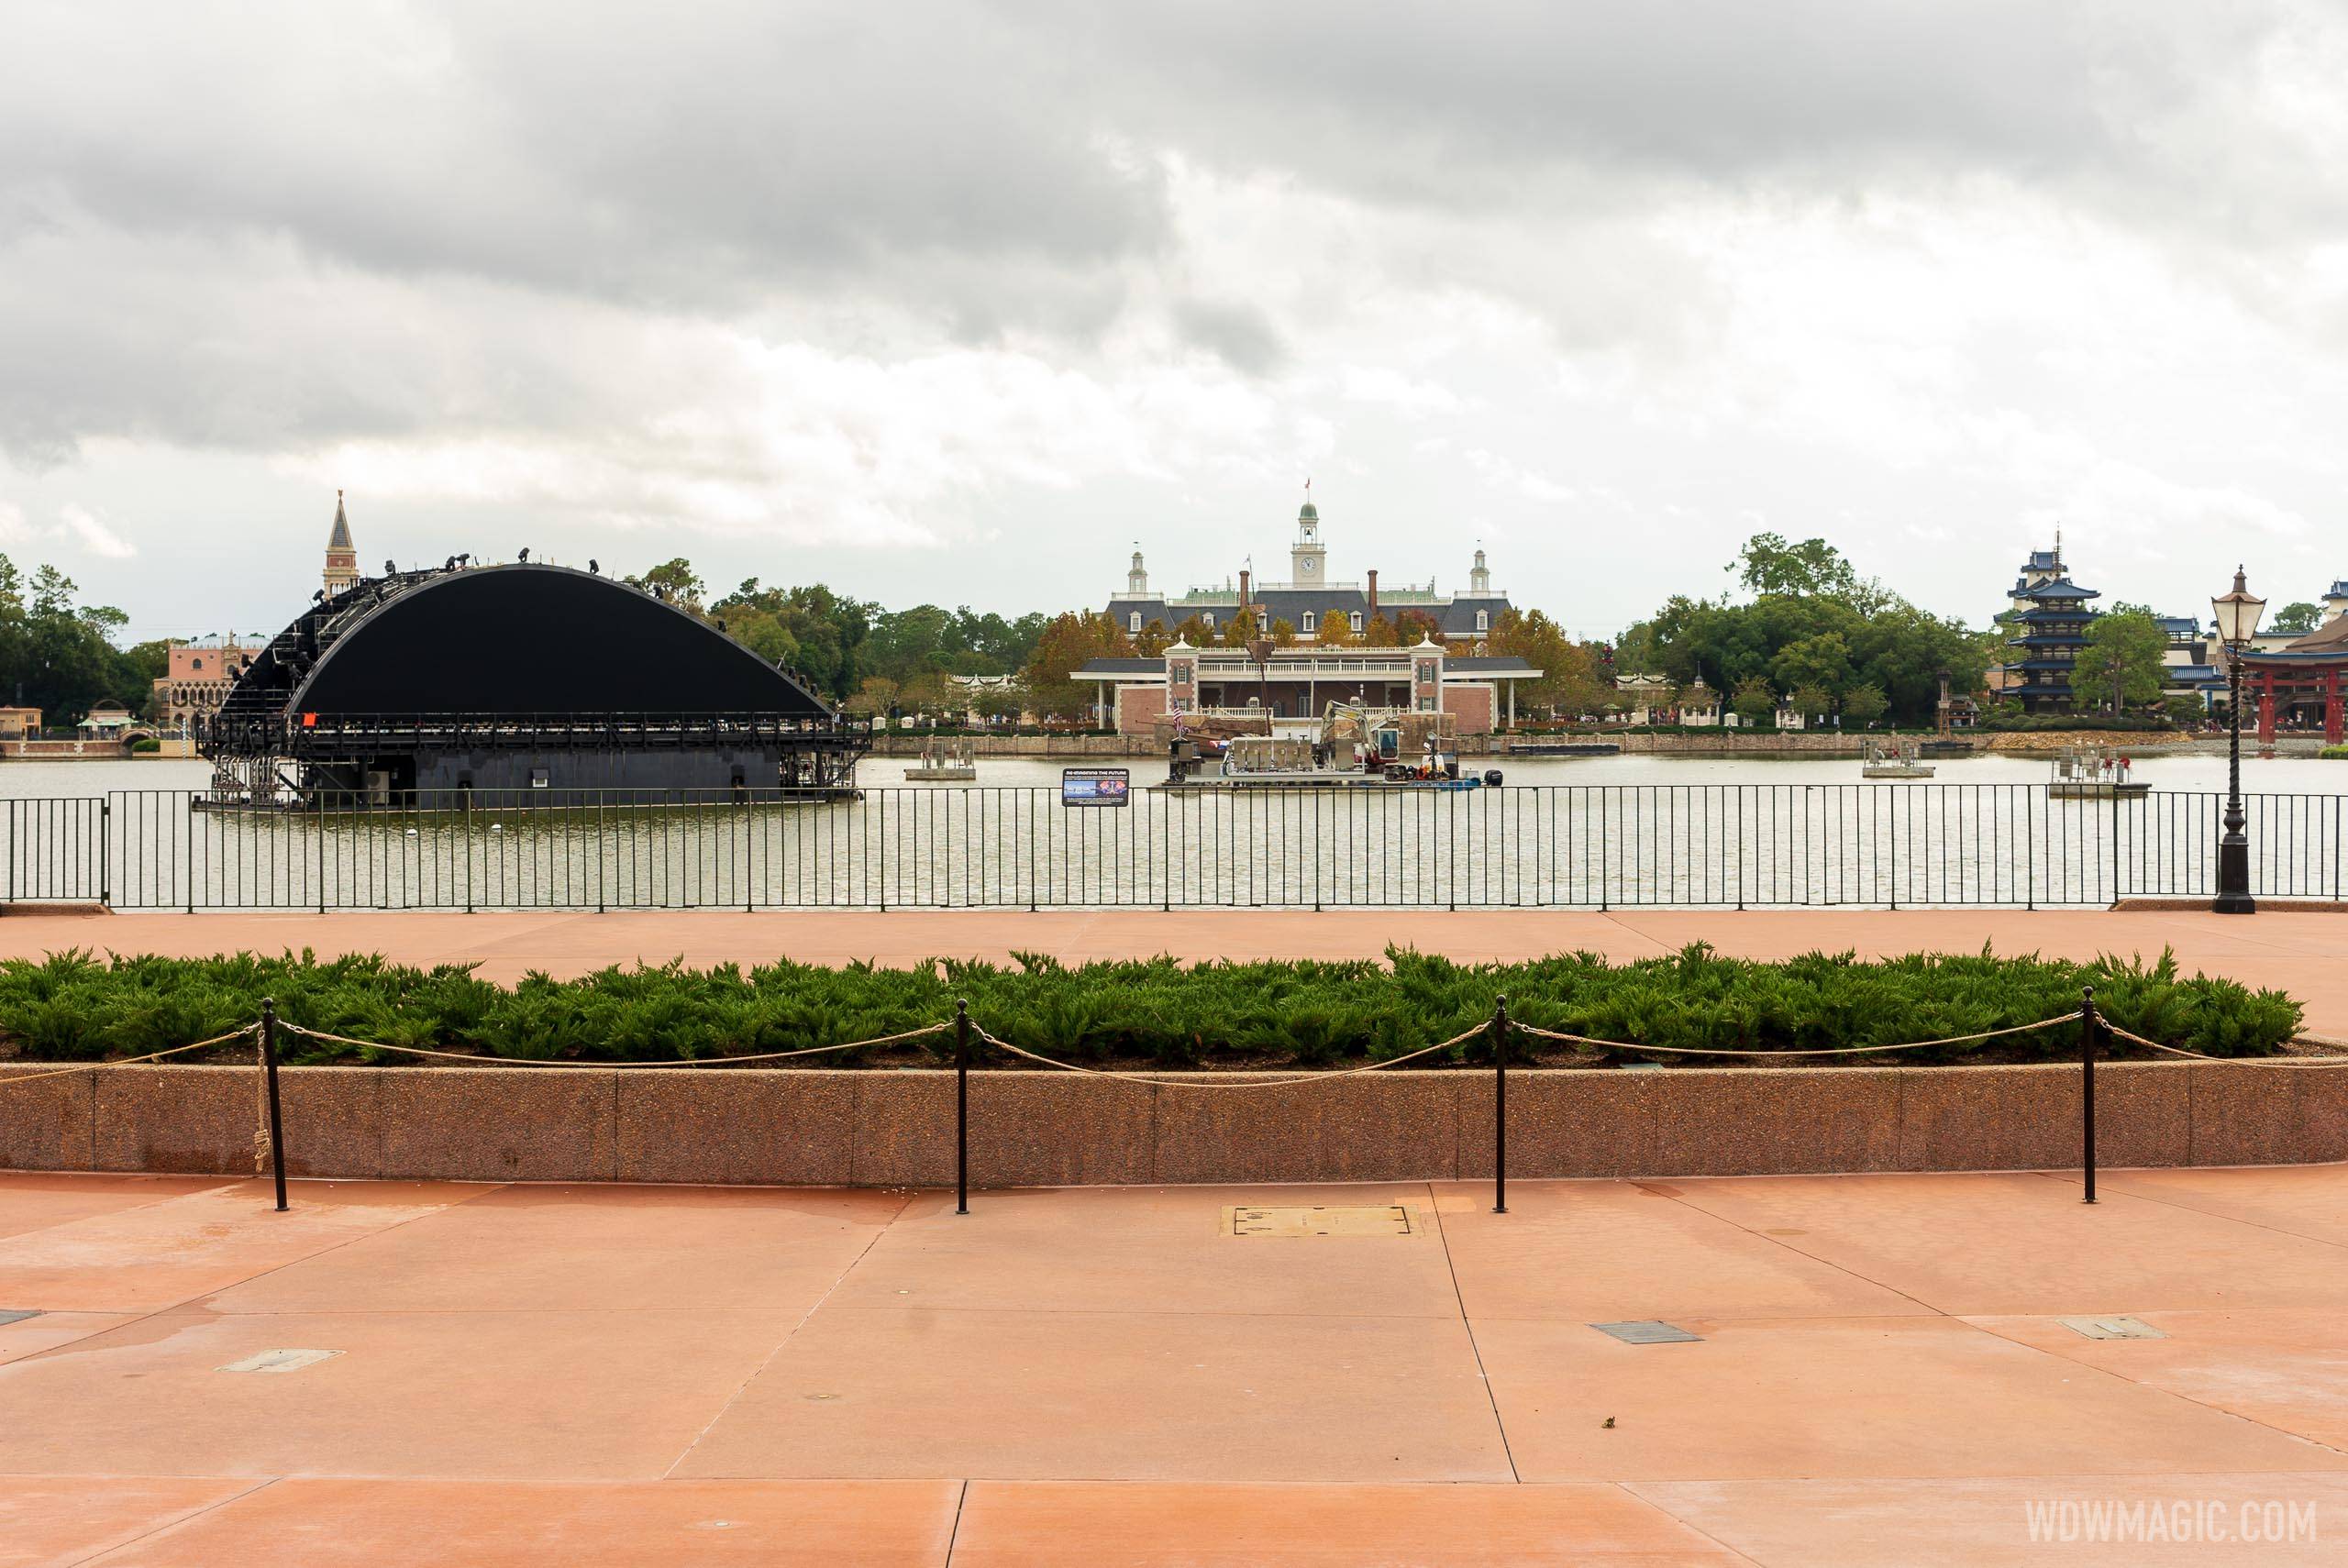 PHOTOS - 'Natural View' lens offers a realistic impression of the size of the Harmonious show barges in World Showcase Lagoon